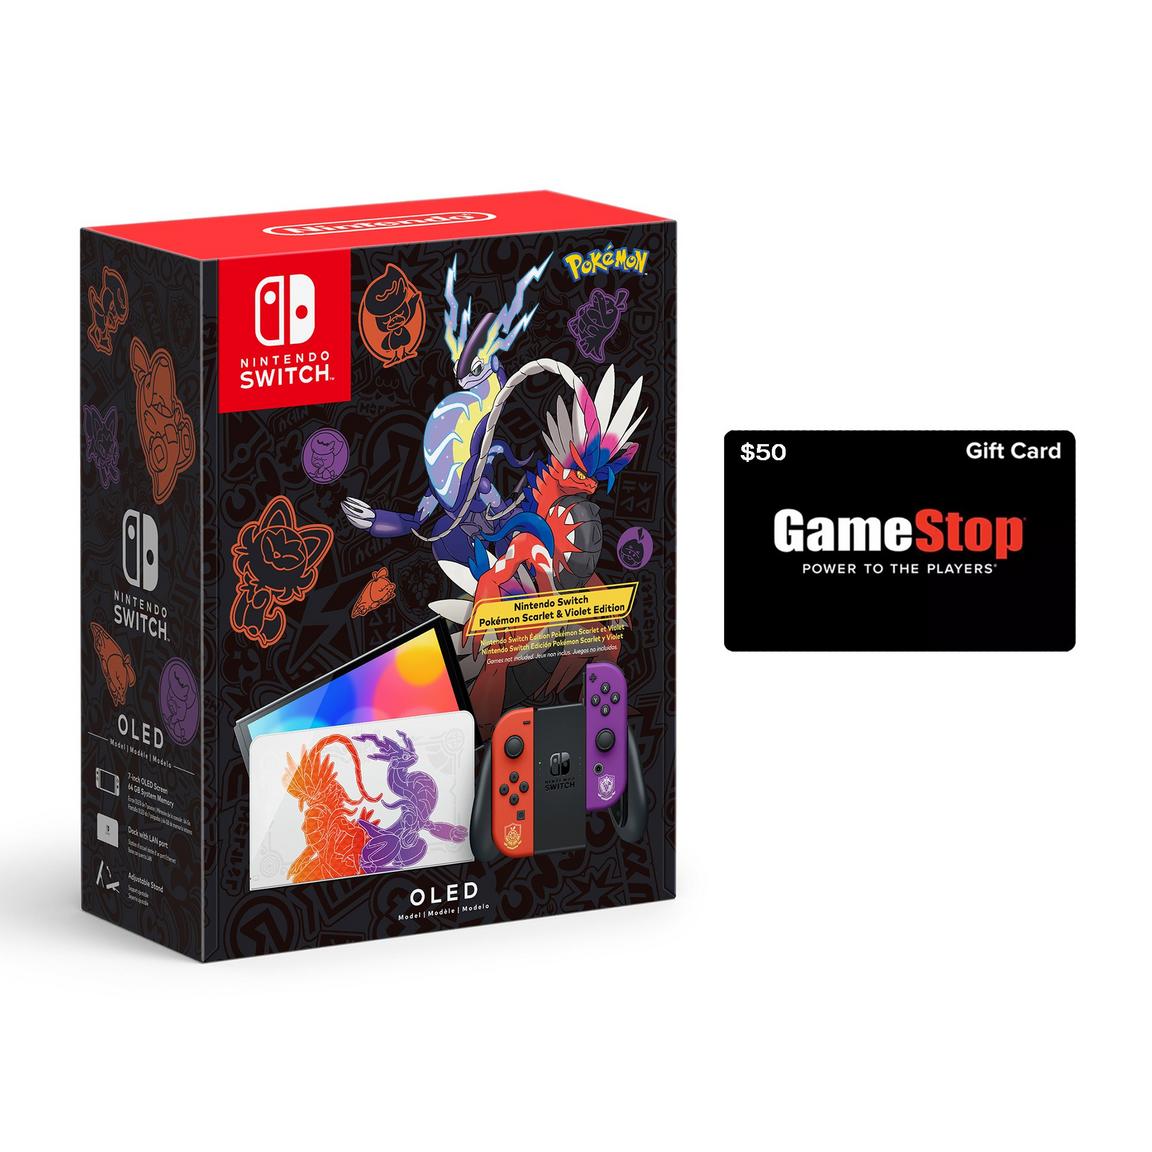 IGN Deals Twitter: "the Pokemon Scarlet Violet Nintendo Switch OLED + $50 GameStop gift card bundle is in stock at for $409.99 ⚡️ https://t.co/YfSwDer2i0 / X